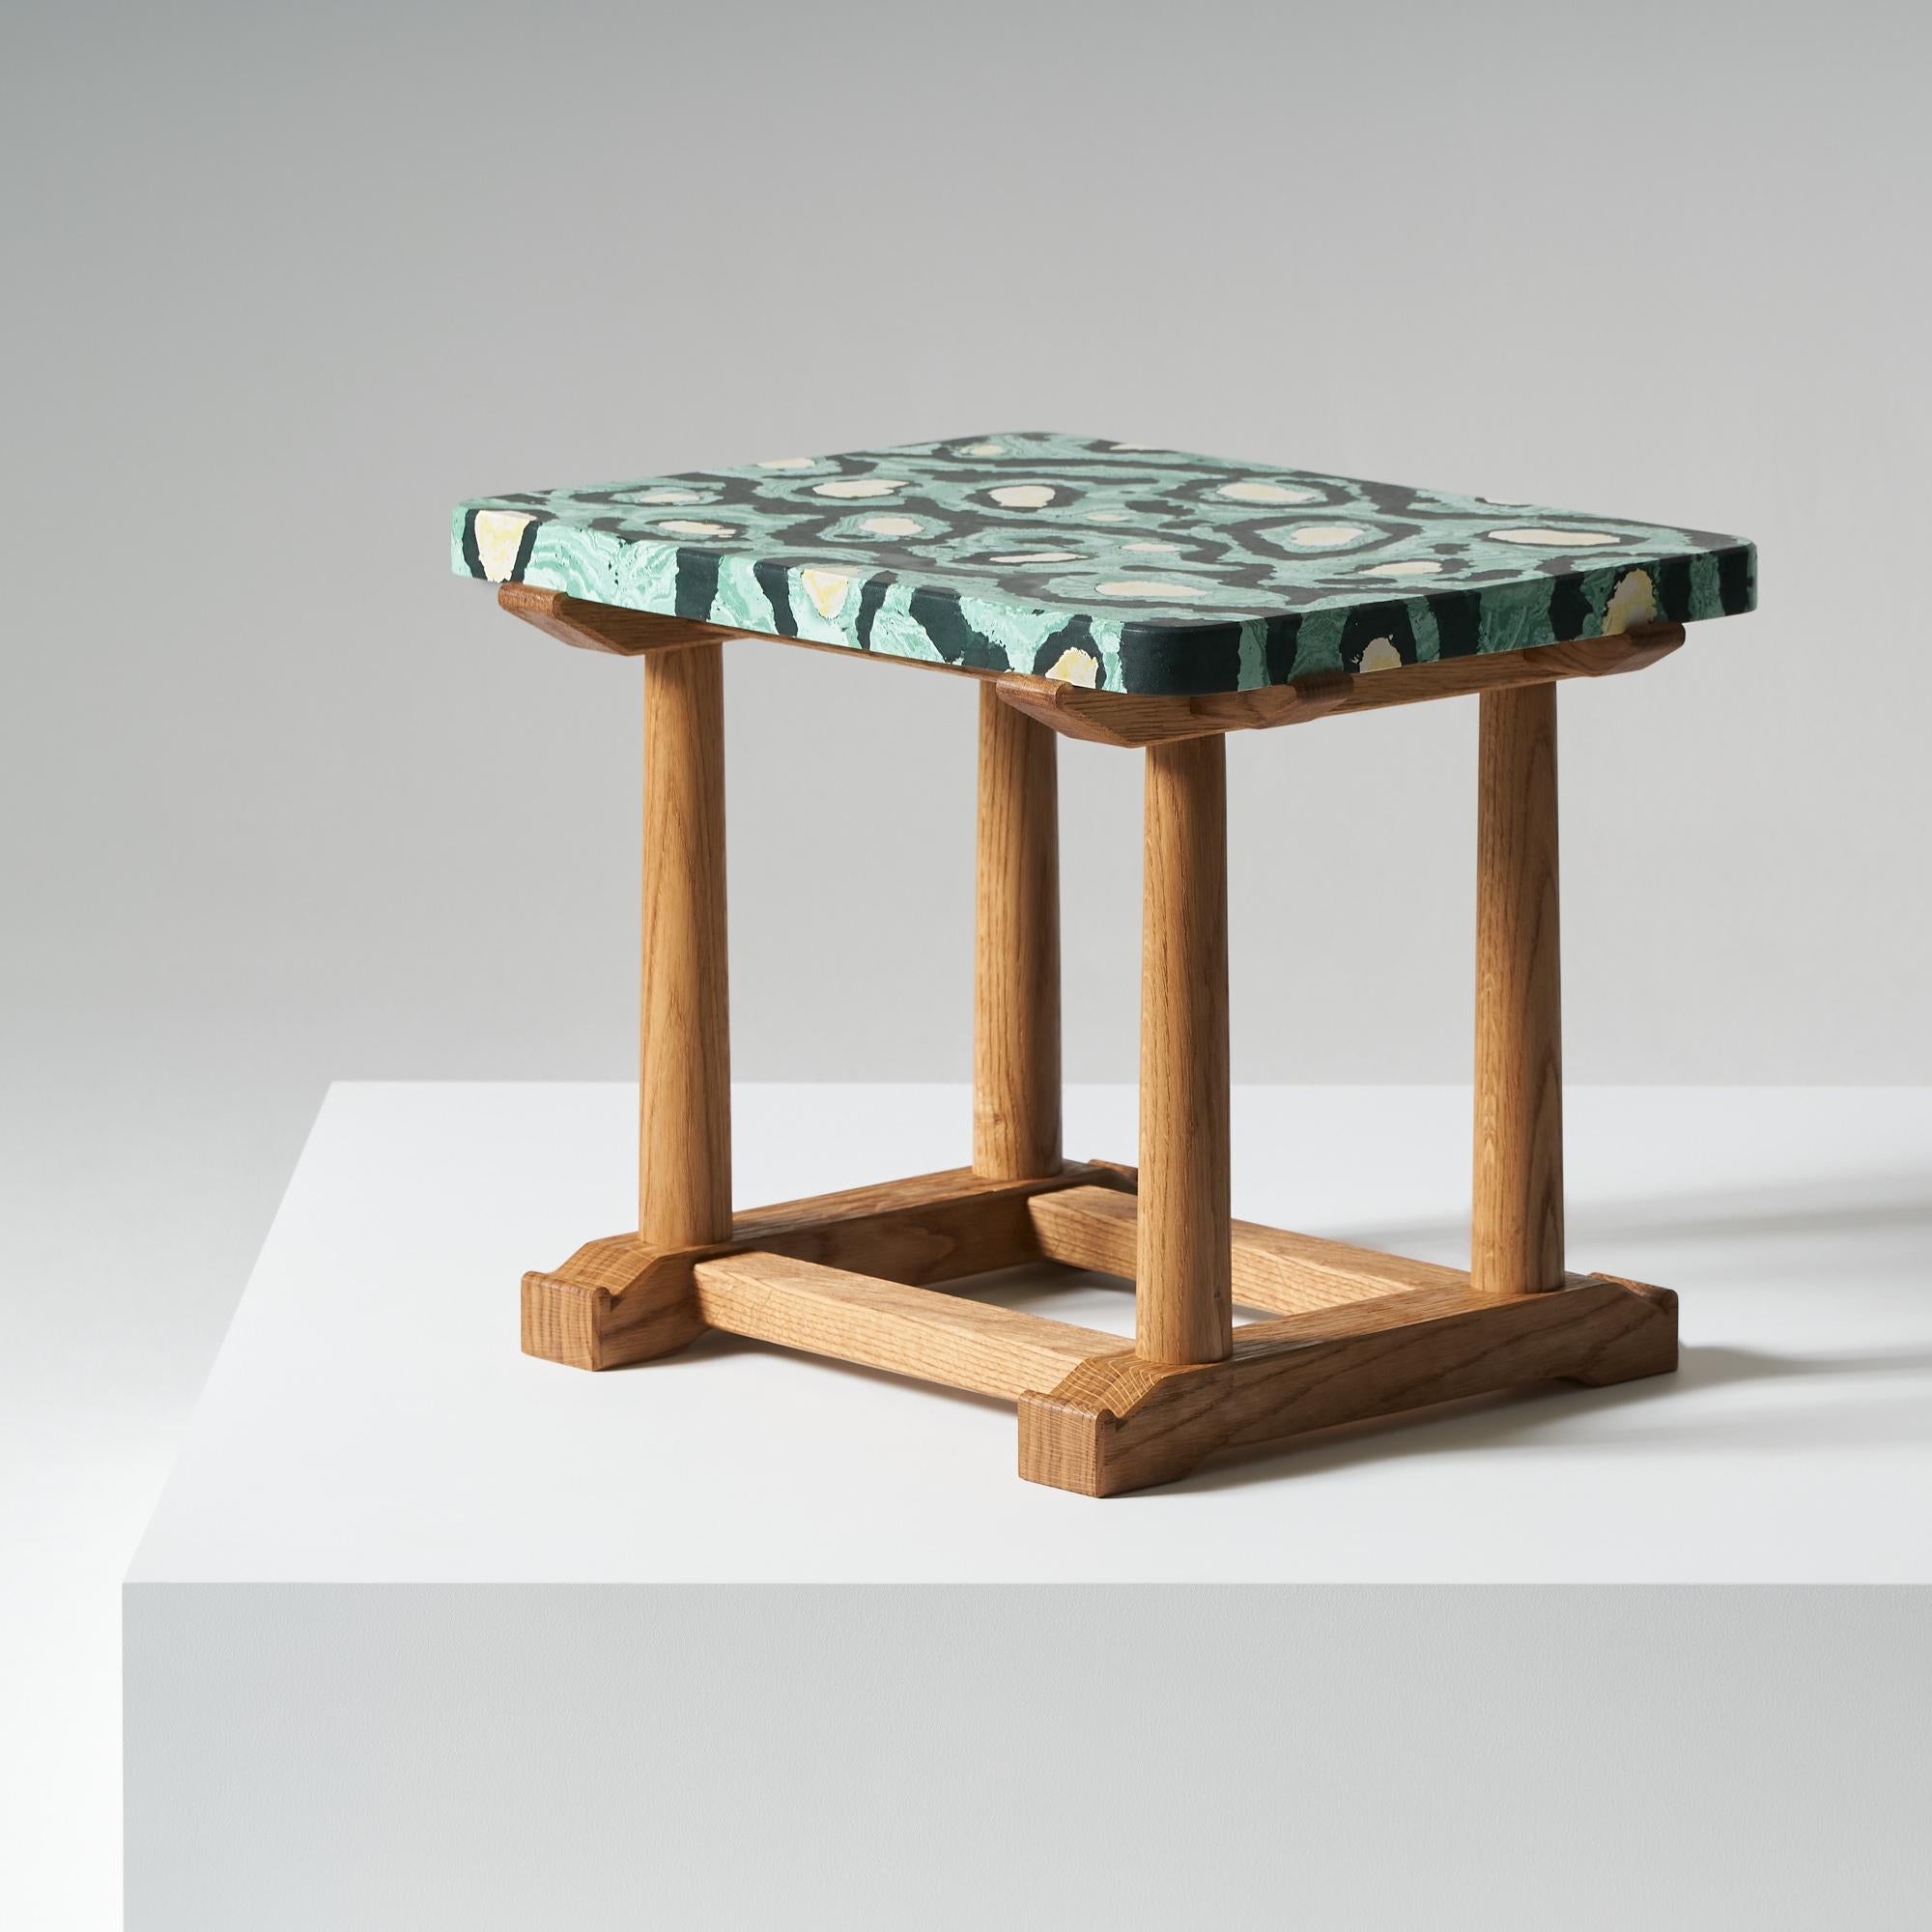 And objects, product design studio founded by Martin Brudnizki and Nick Jeanes based in London.

The Bighton side table has a crafted, brushed, English oak base made by one of our specialist UK craftsmen. The top is hand formed Scagliola finished